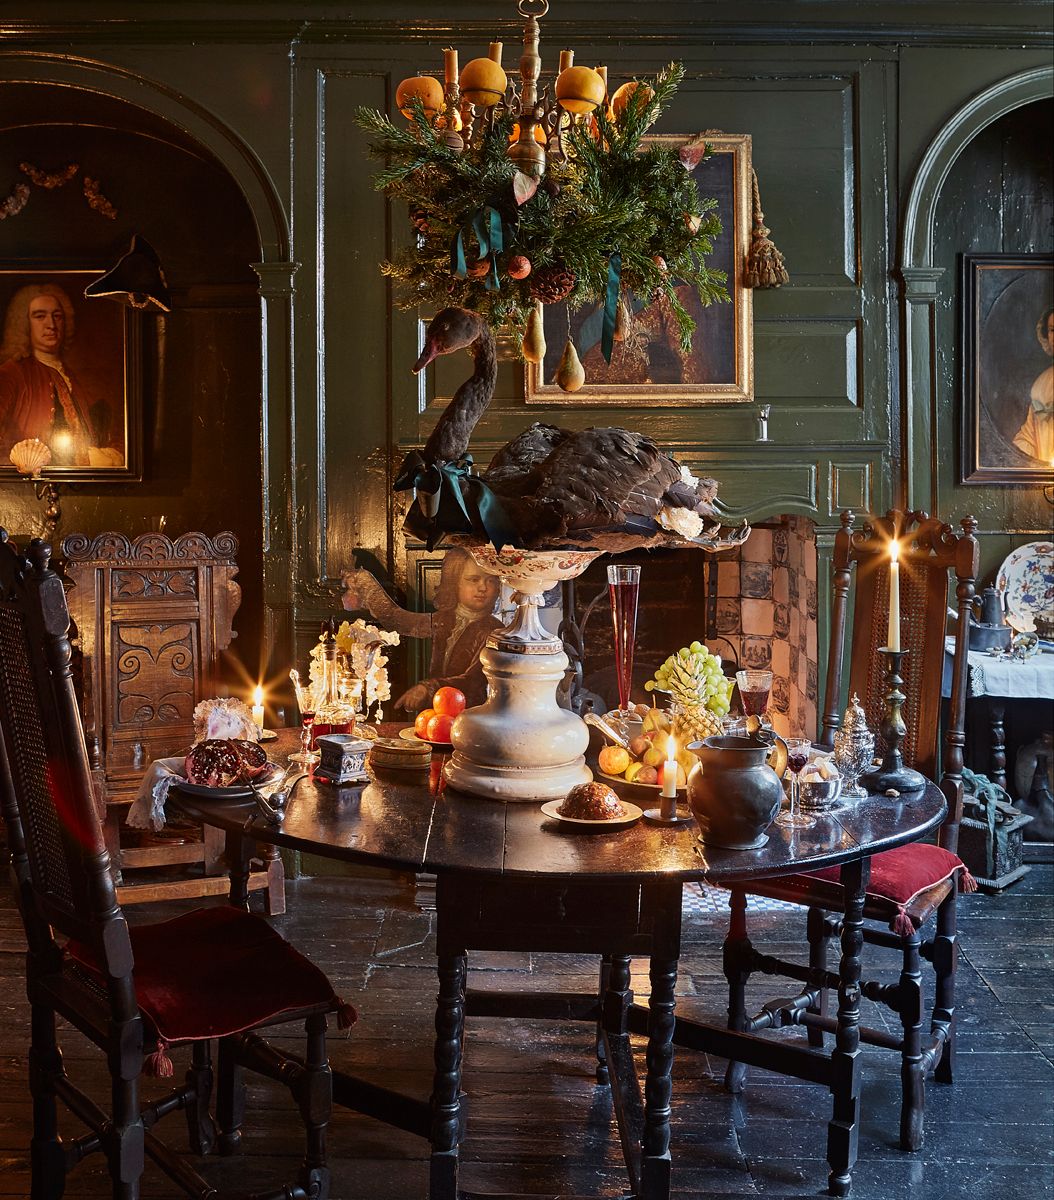 Dennis Severs House in London decorated for the holidays - photo by Louis Gaillard. #oldworldstyle #dennissevers